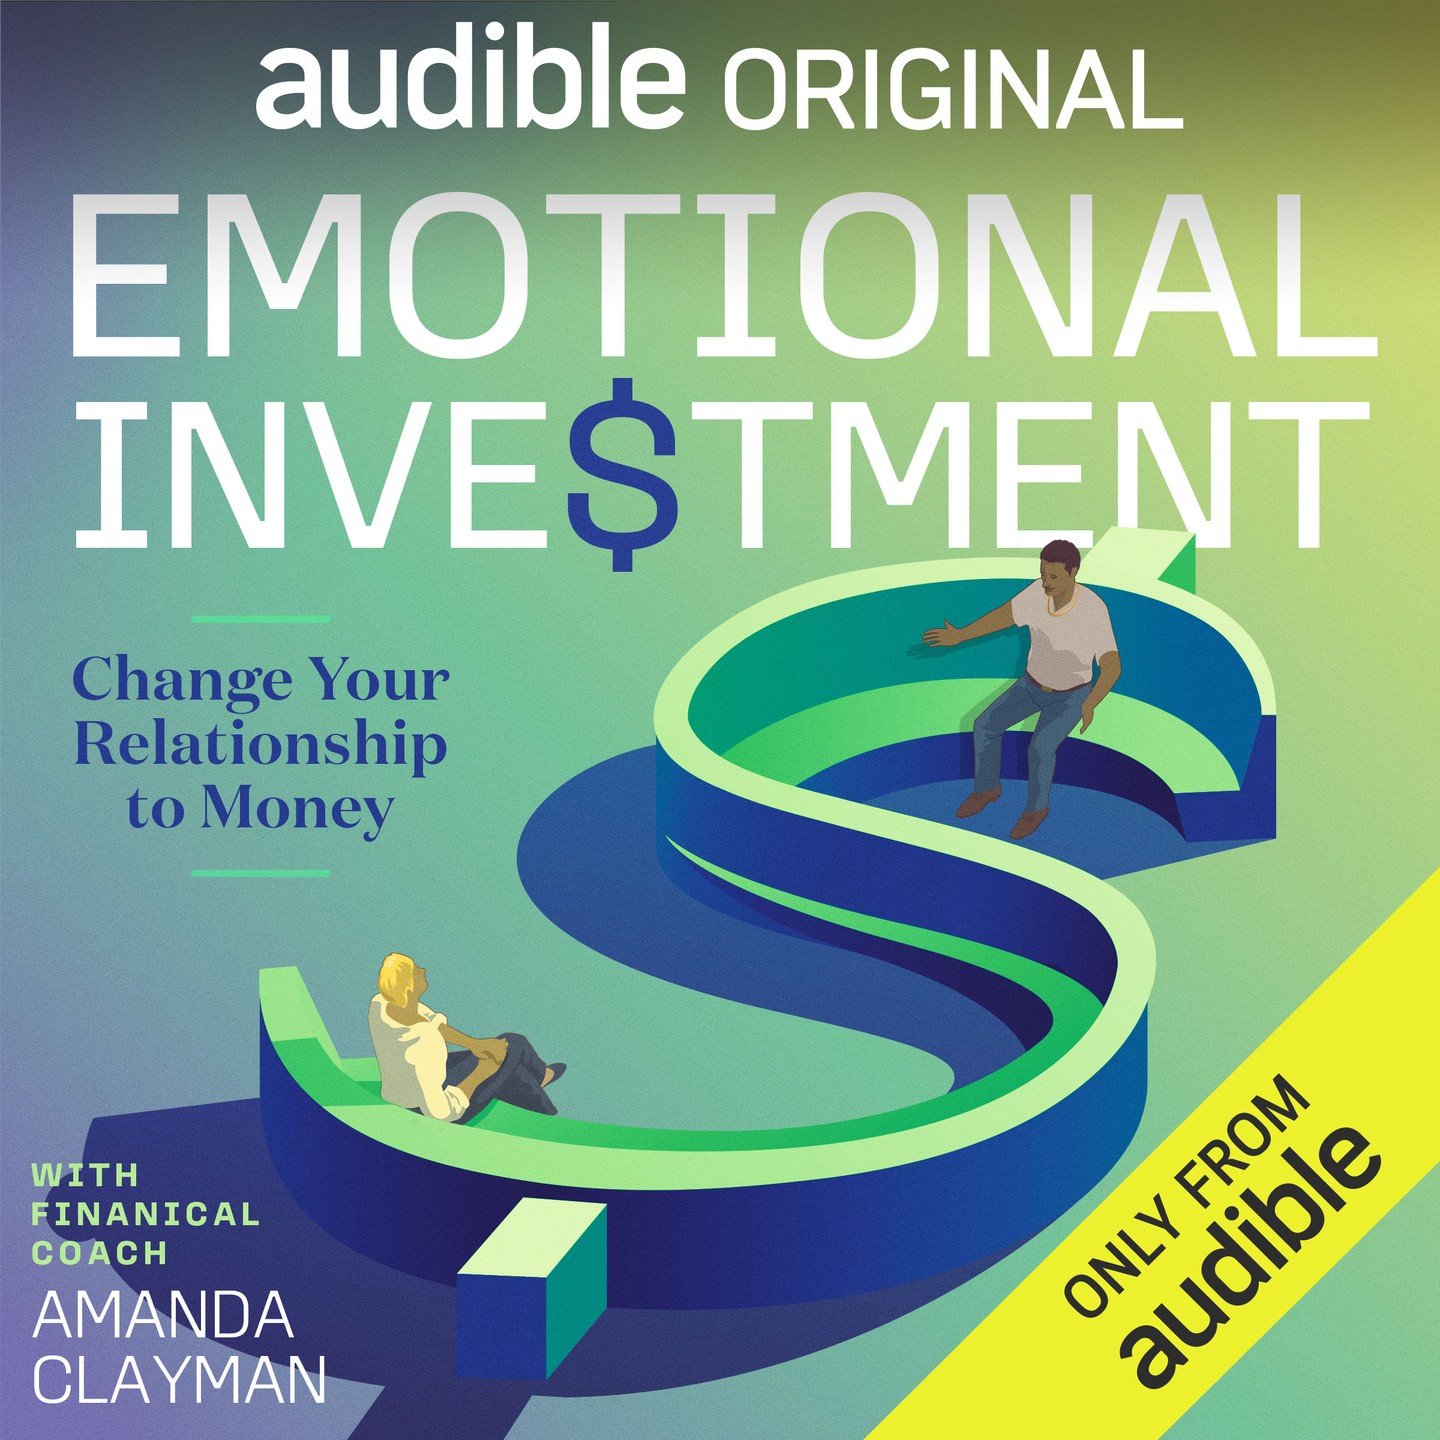 NEW SHOW ALERT! 

I made a show with @amandaclayman about money and feelings. I learned a few things, but the main thing I learned is that she is a STAR; specifically, an AUDIO STAR.

The show is called Emotional Investment and the description of the